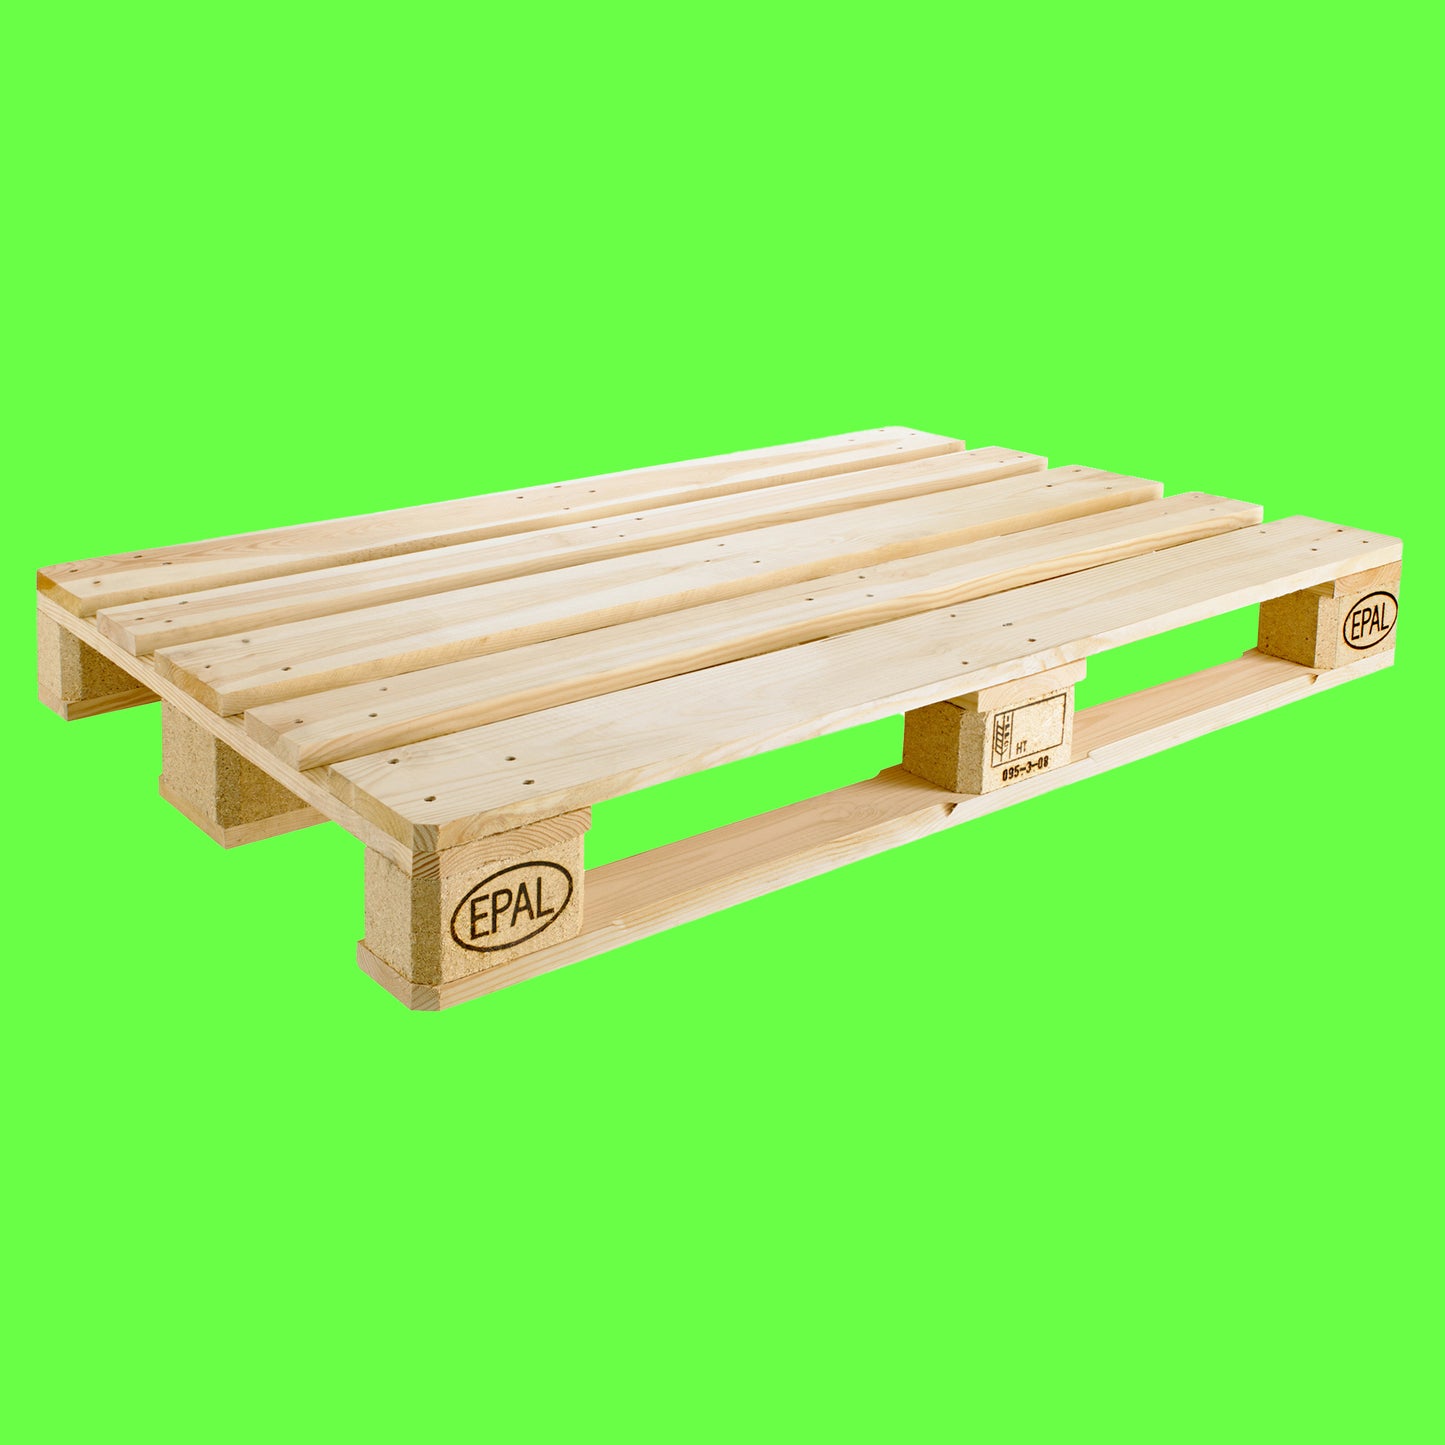 EPAL marked treated wooden pallet 1.2m long and 0.8m wide